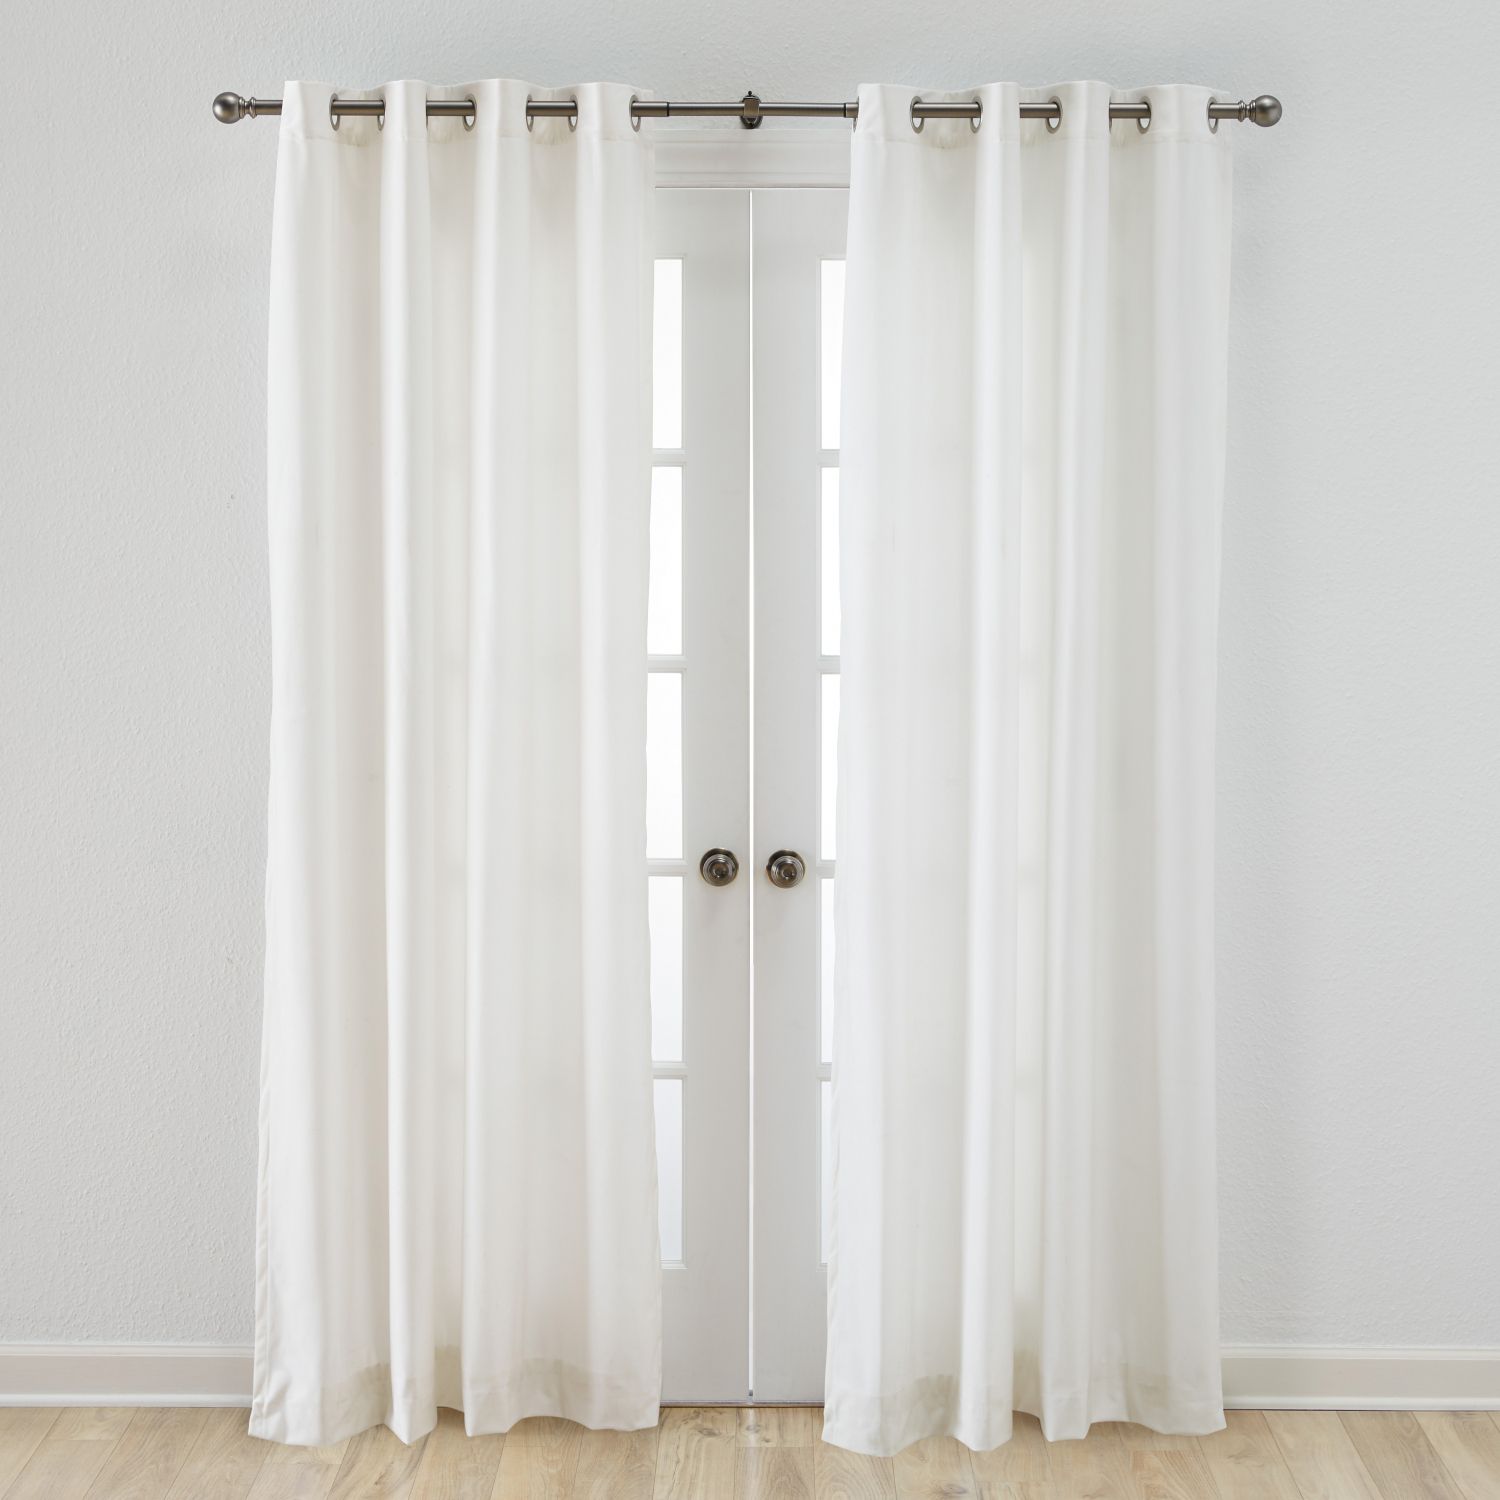 Details About White Window Covering Panel Pair Curtain Home Drapes Velvet  96 Inch Art Deco With Regard To Velvet Heavyweight Grommet Top Curtain Panel Pairs (View 26 of 30)